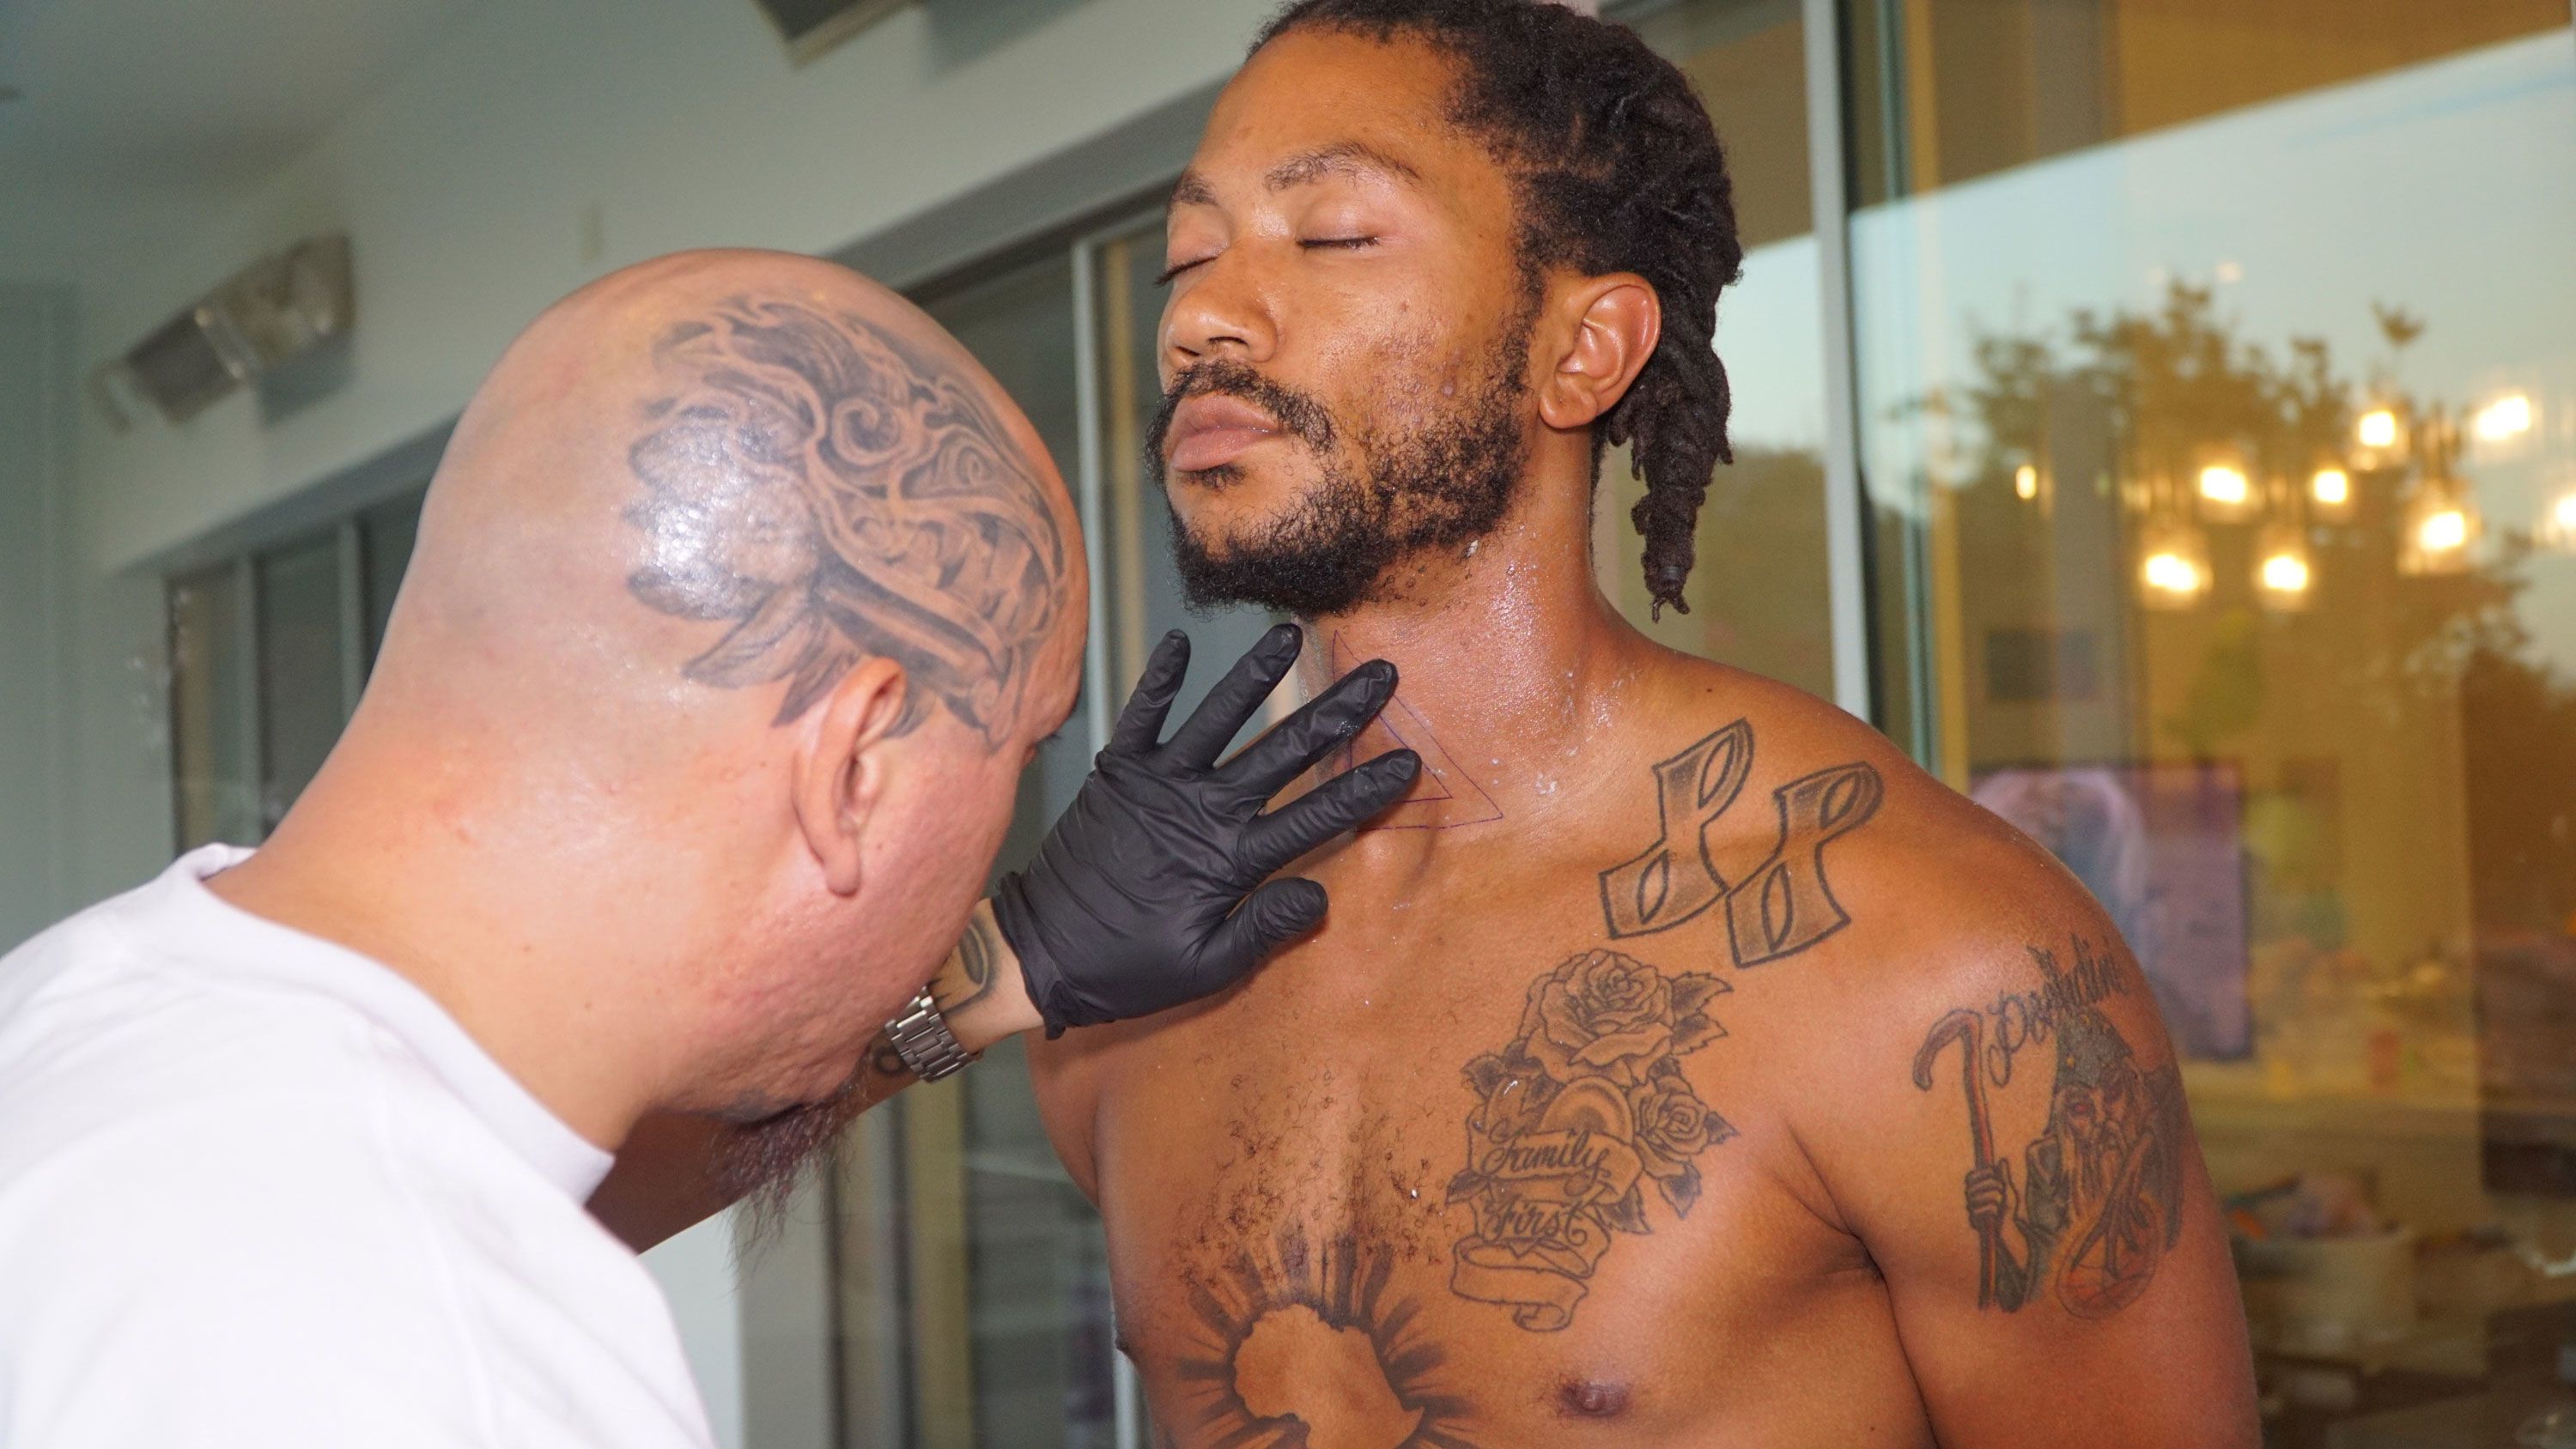 The NBA's tattoo culture has created a new type of influencer